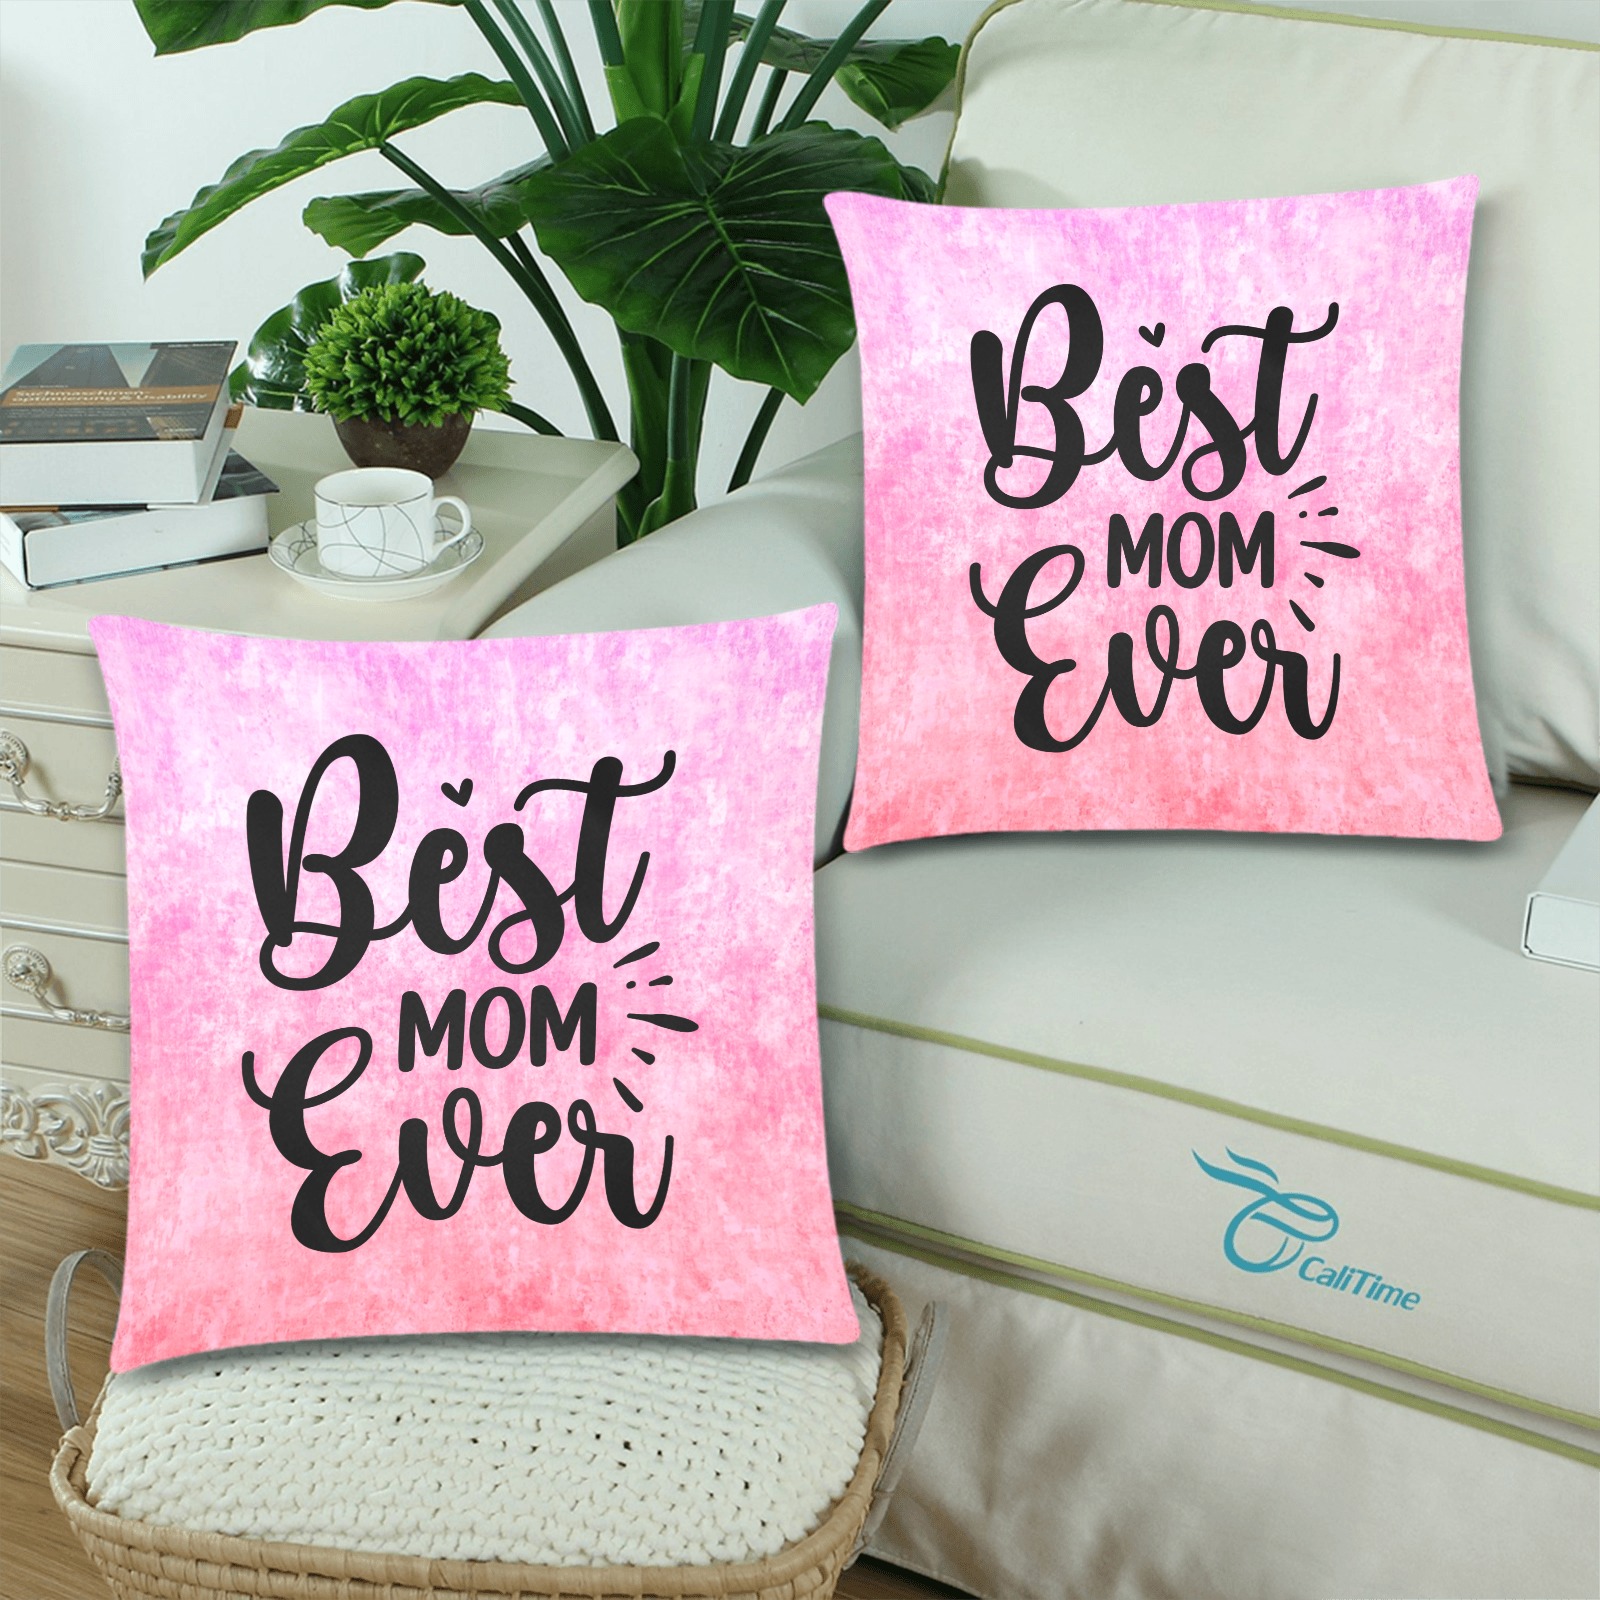 Best Mom Ever - Pink Custom Zippered Pillow Cases 18"x 18" (Twin Sides) (Set of 2)